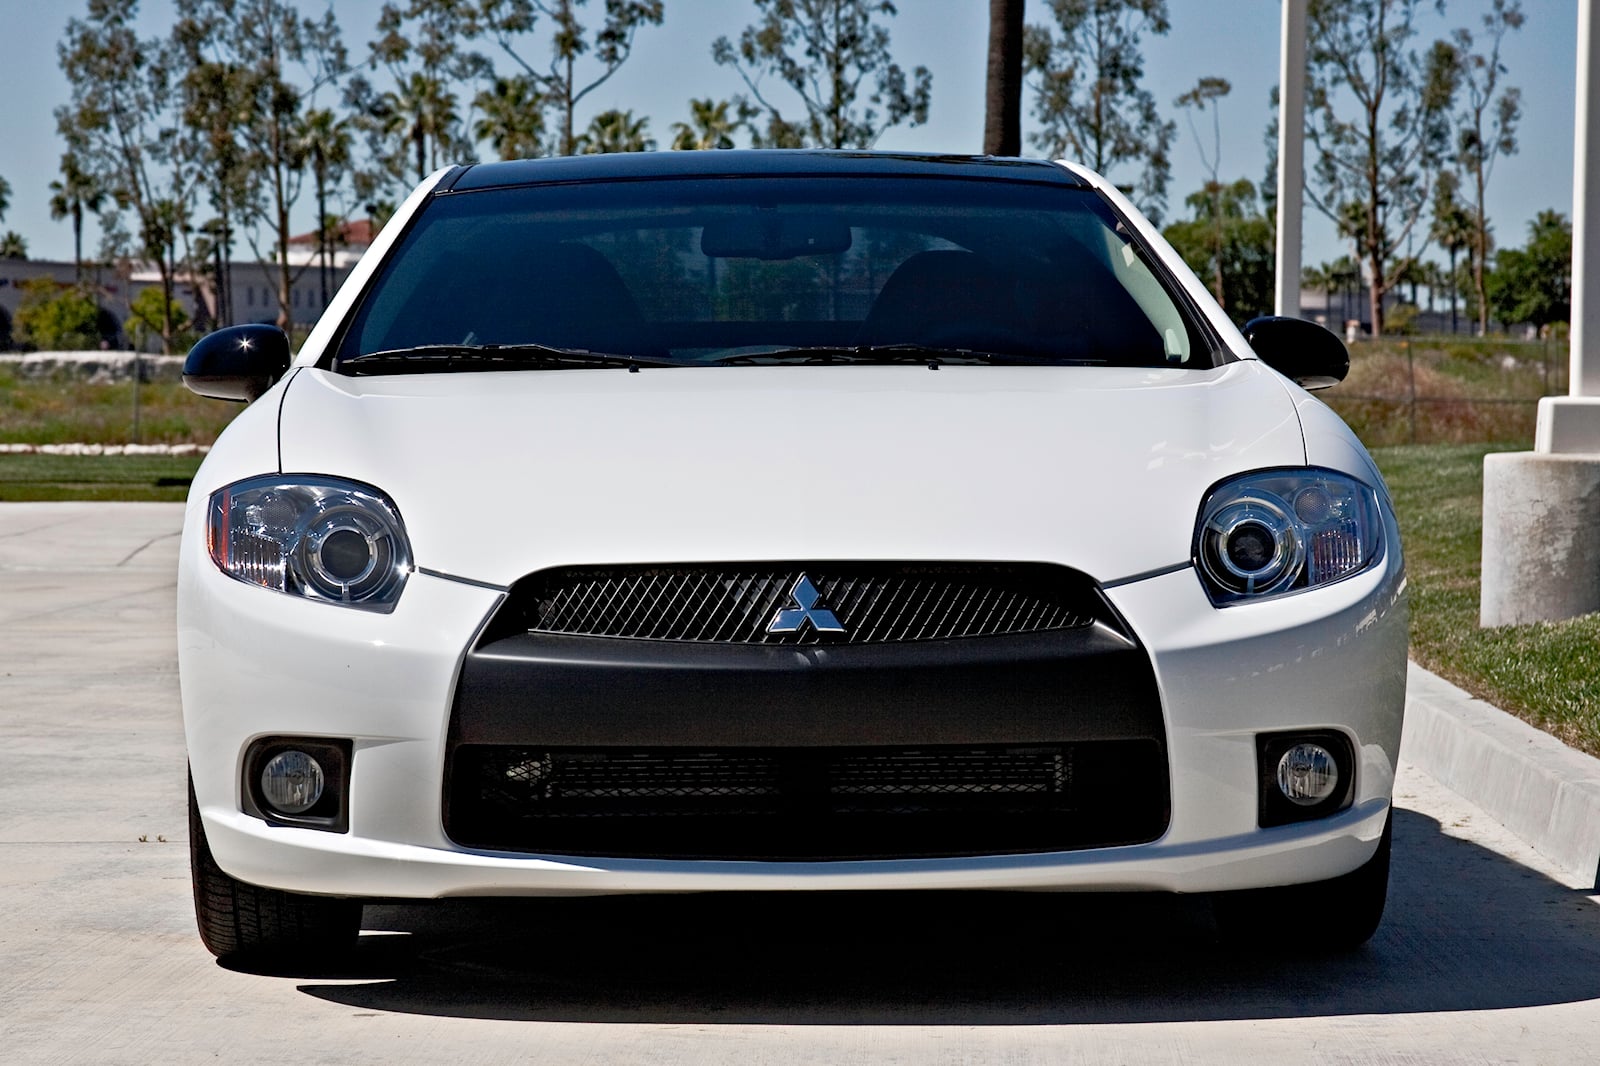 2012 Mitsubishi Eclipse Coupe Front View